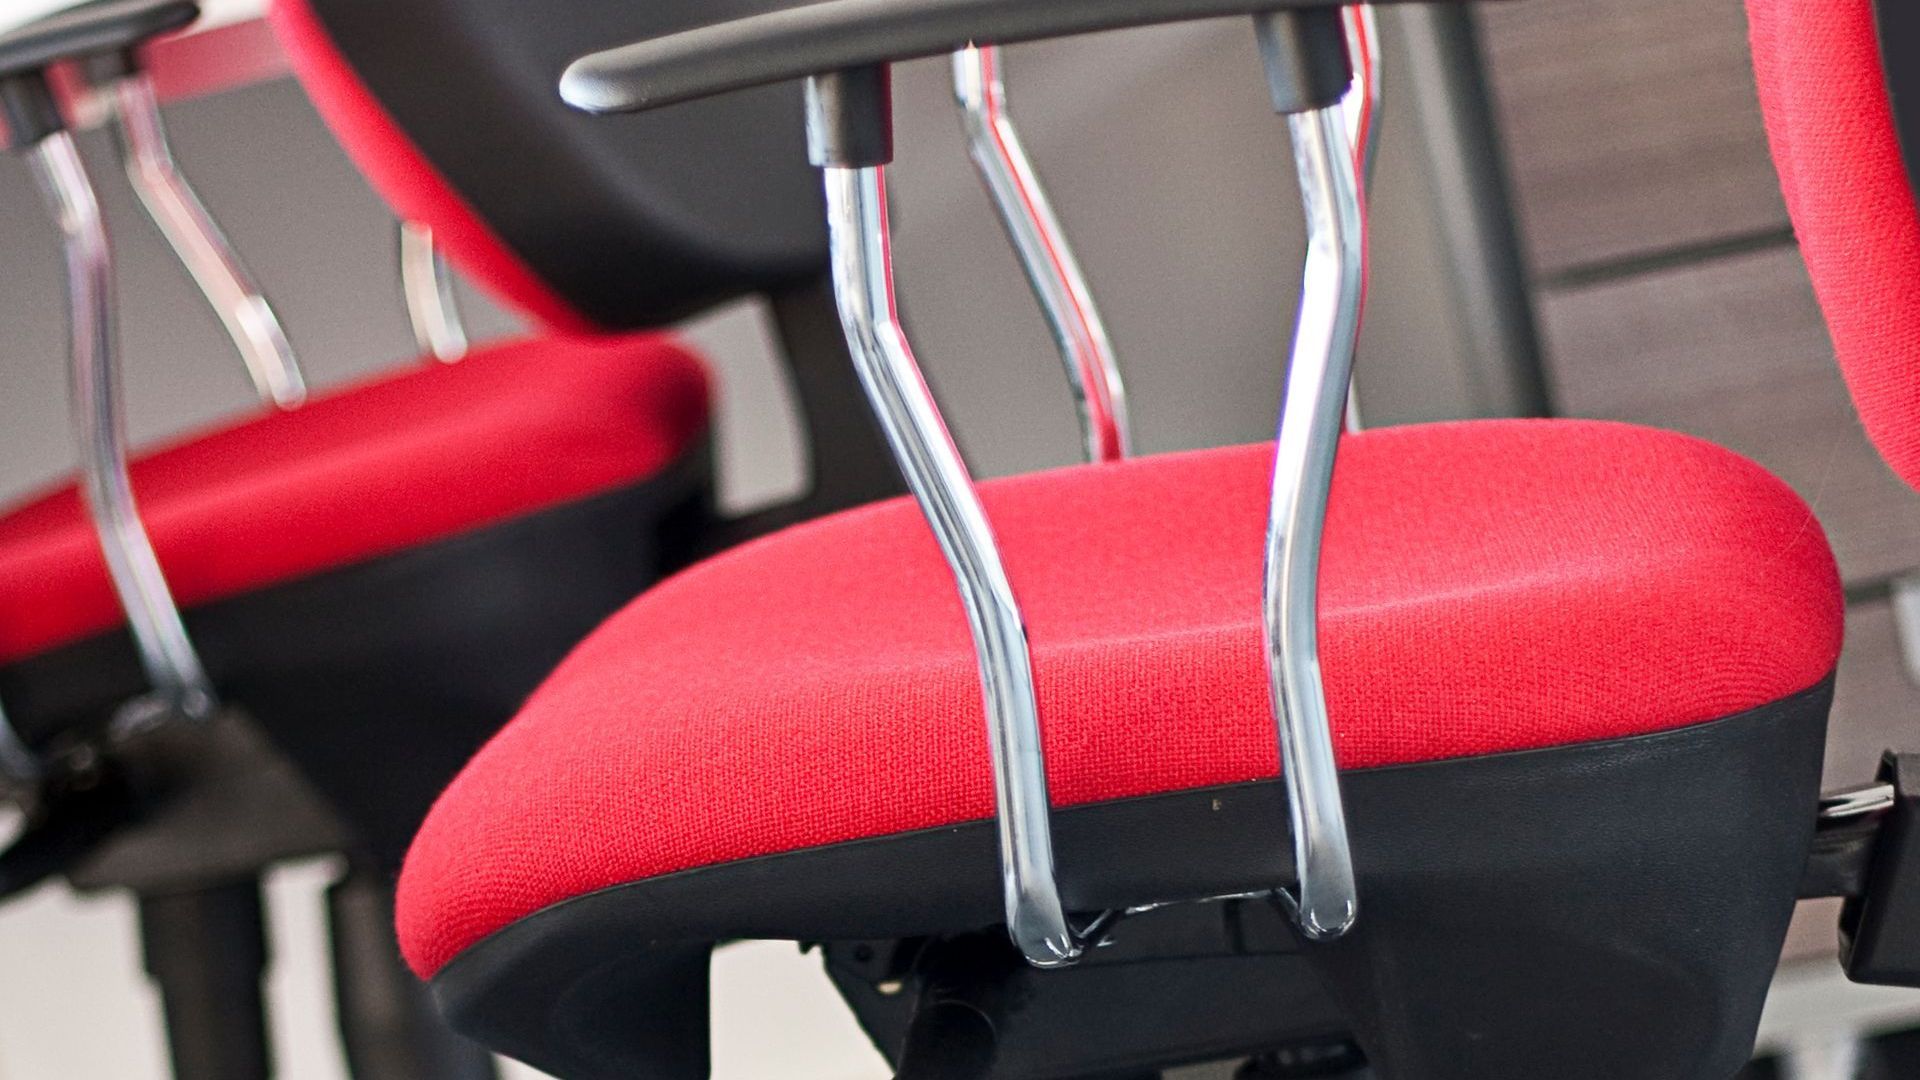 Close up of a red fabric chair. The arms are silver and black. 